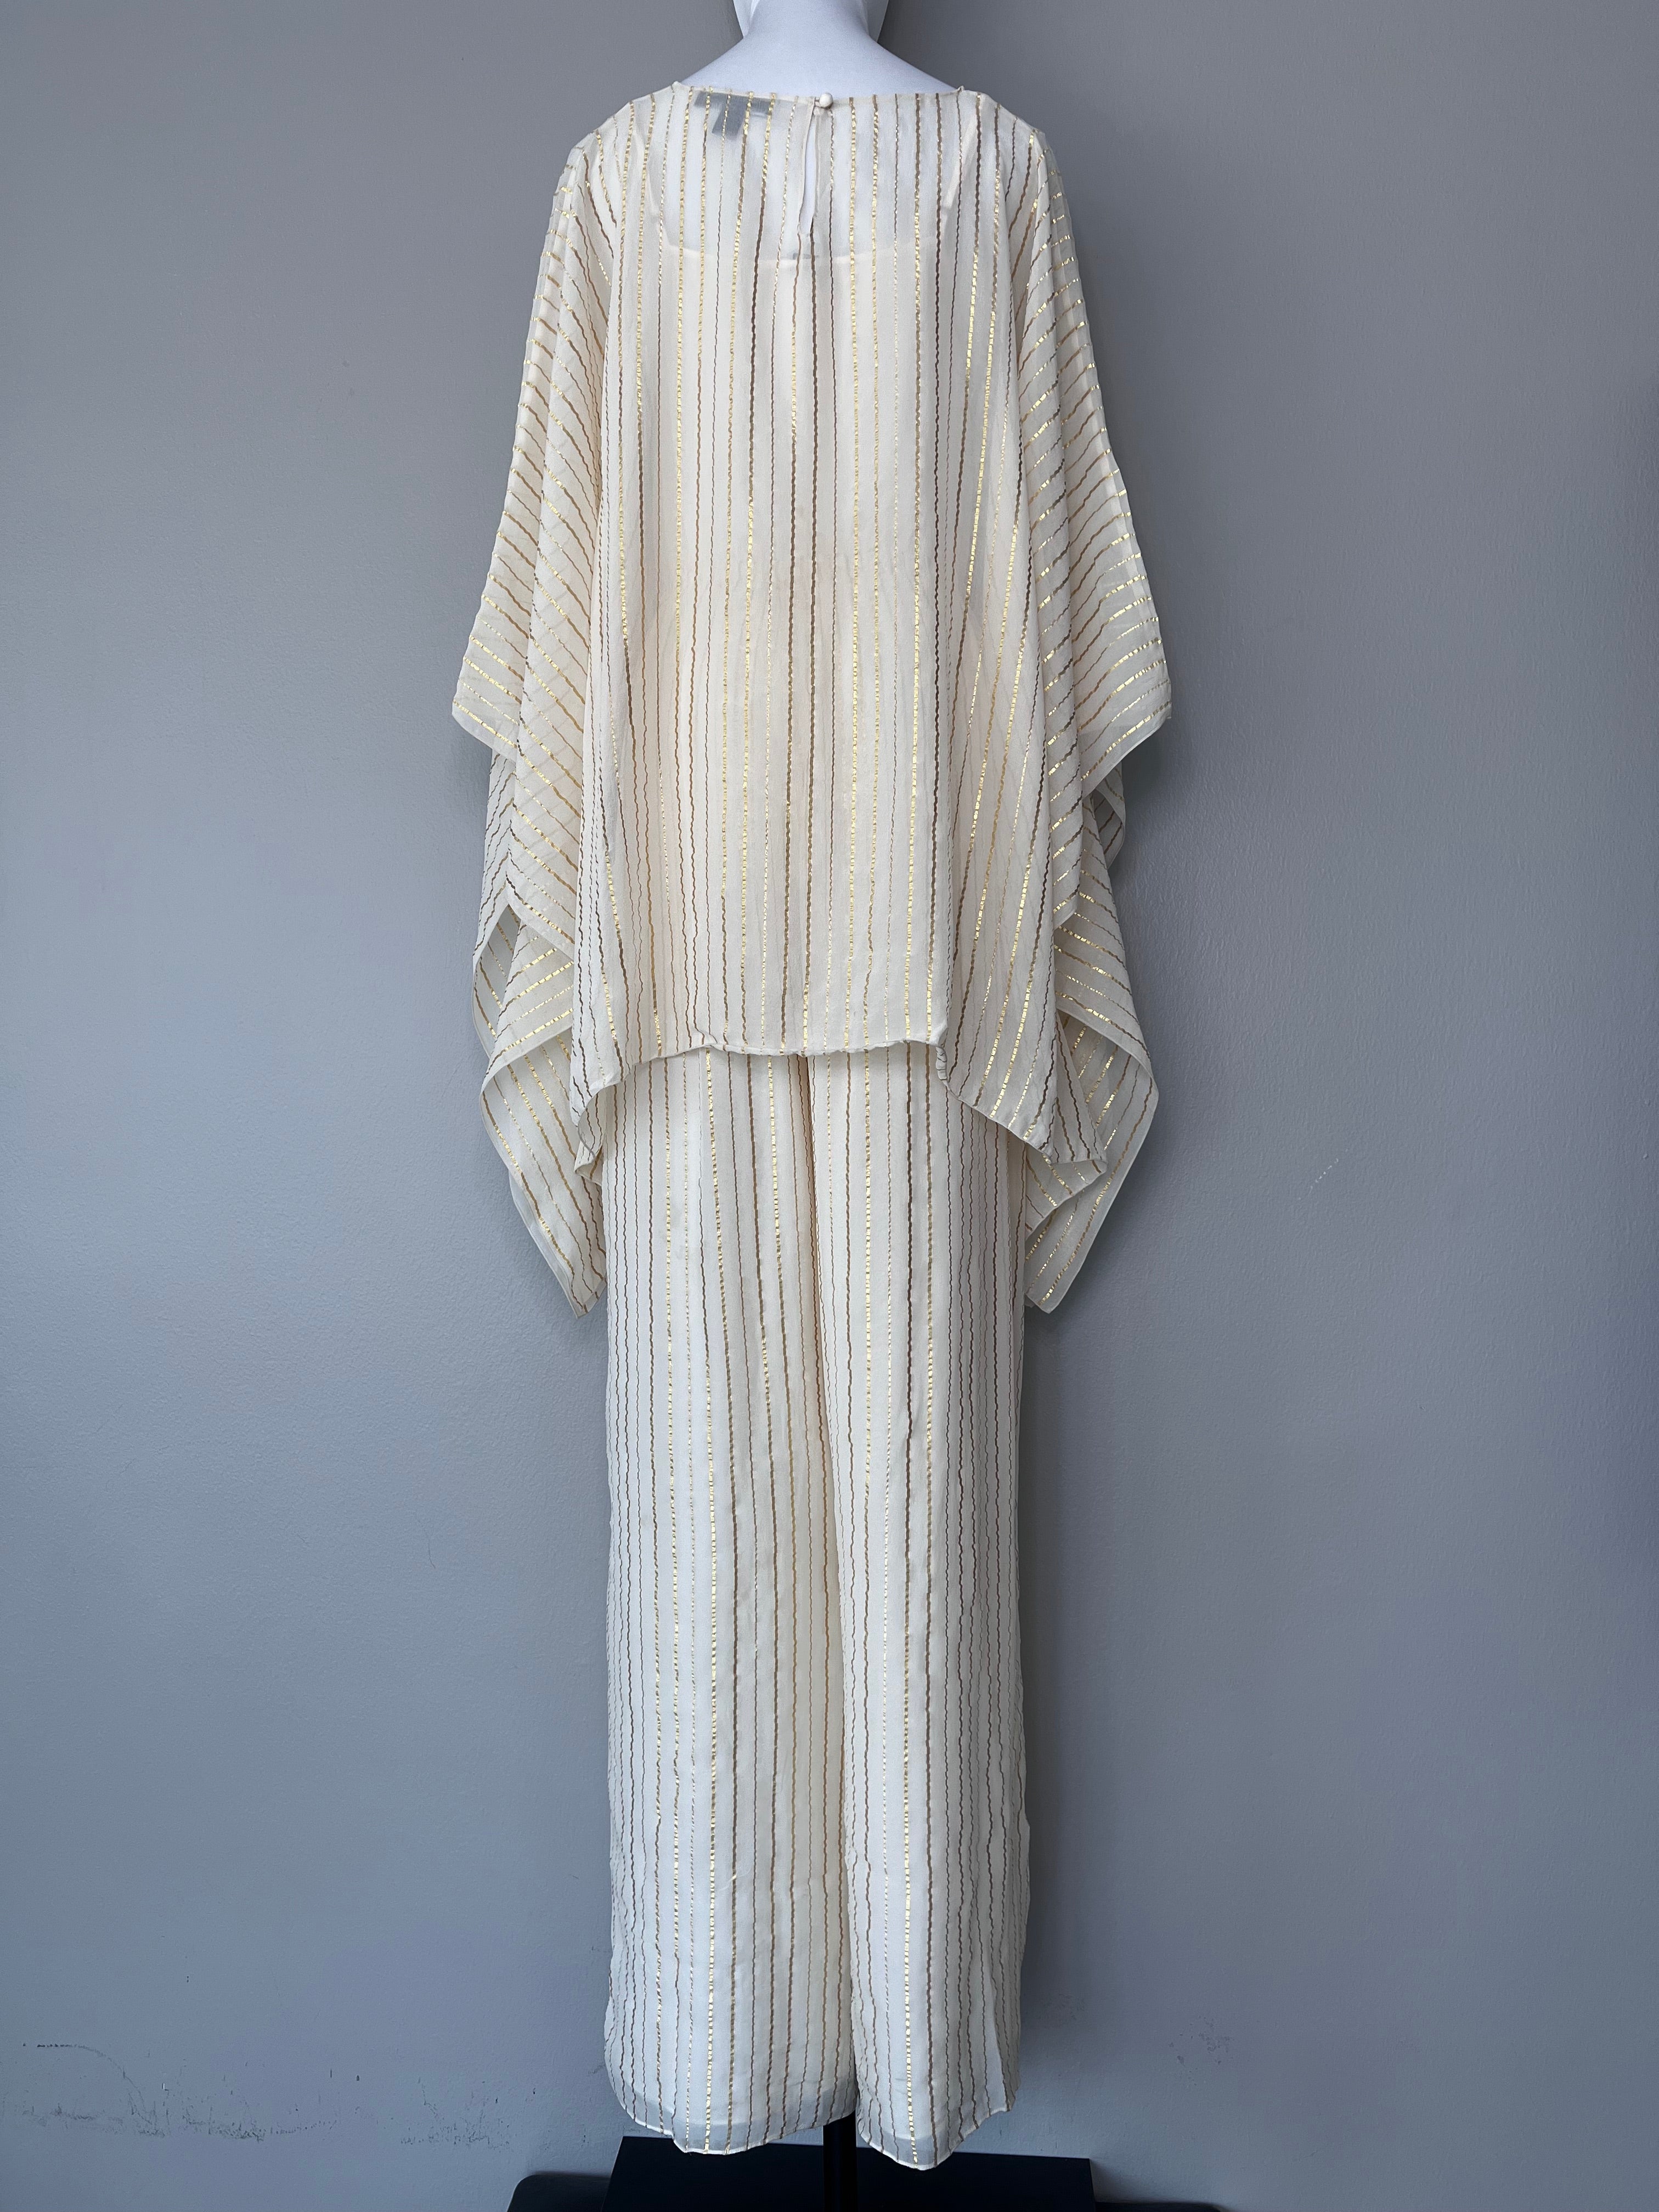 Gold & white striped jumpsuit with an oversized top - TOMMY HILFIGER